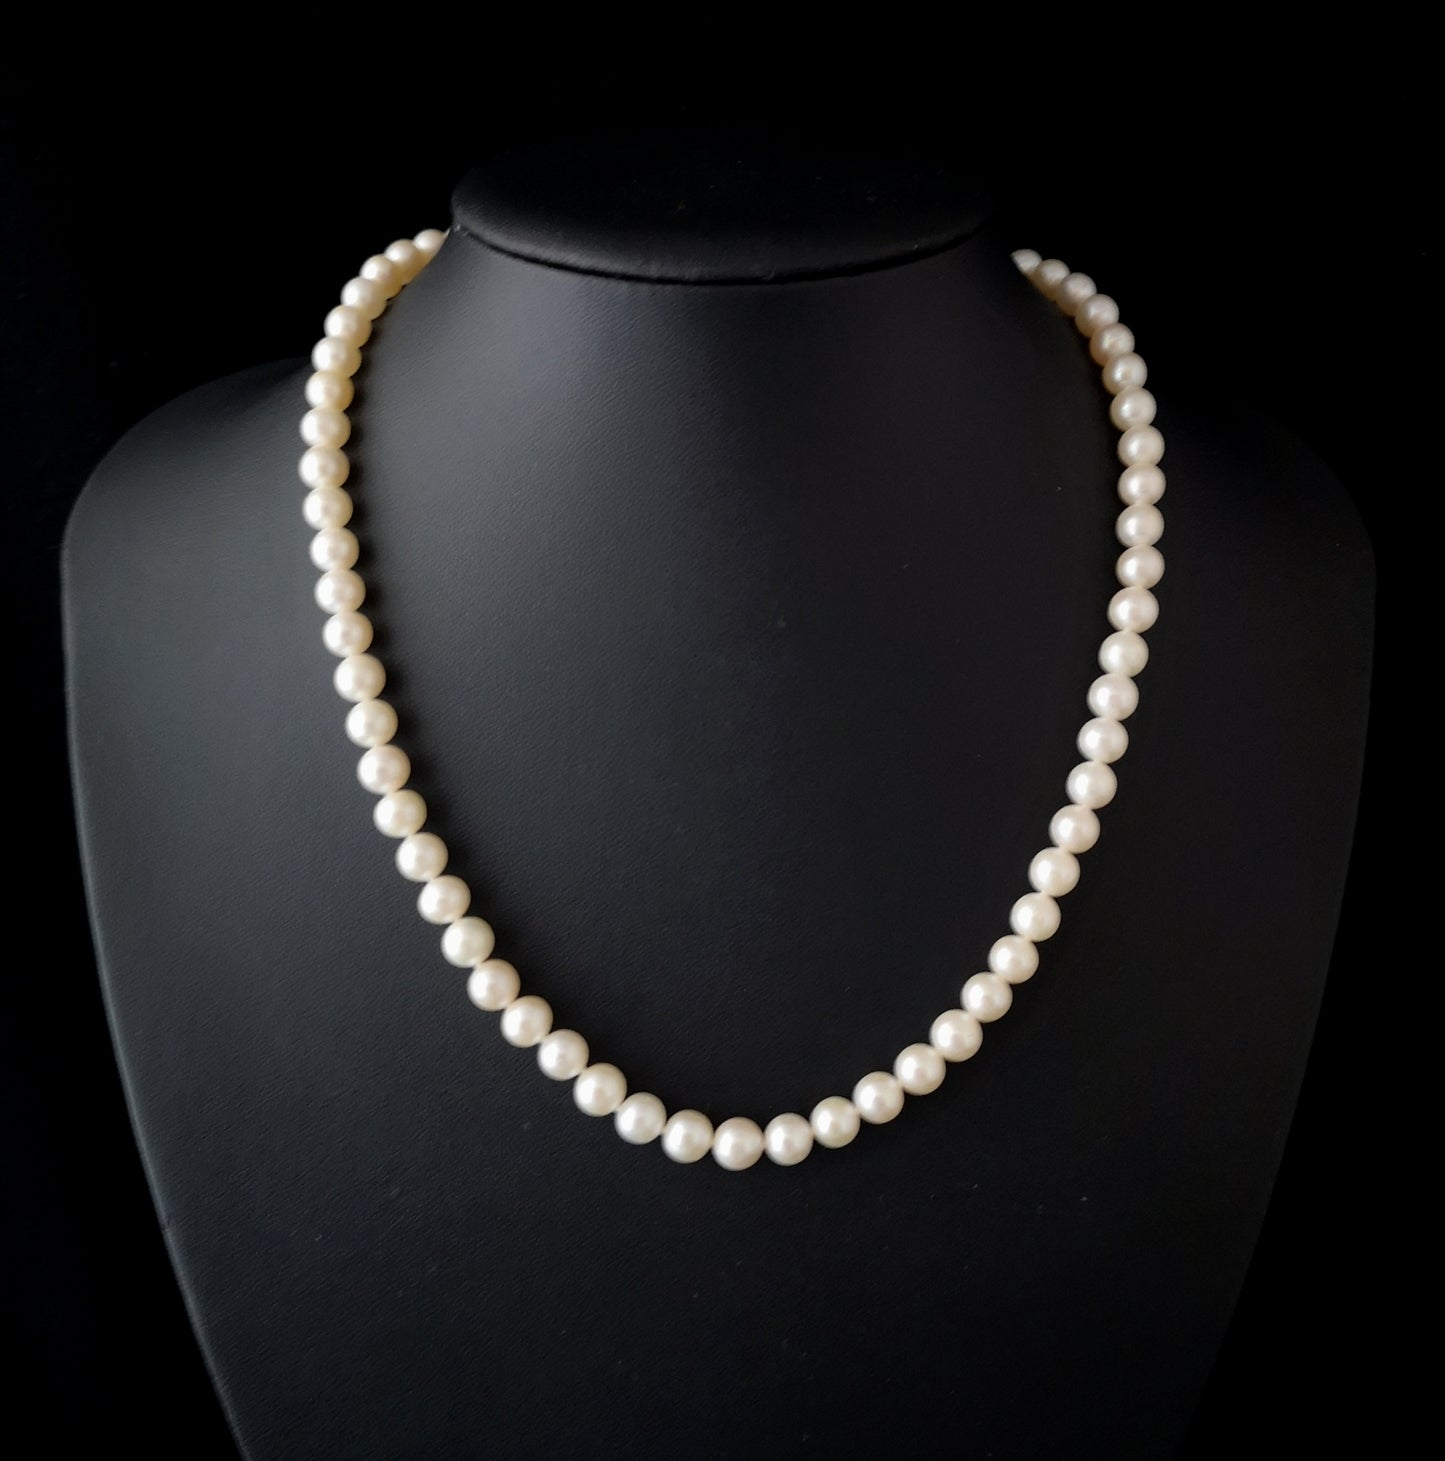 Reserved for Andrew: Vintage 1940s cultured pearl necklace, 14k gold